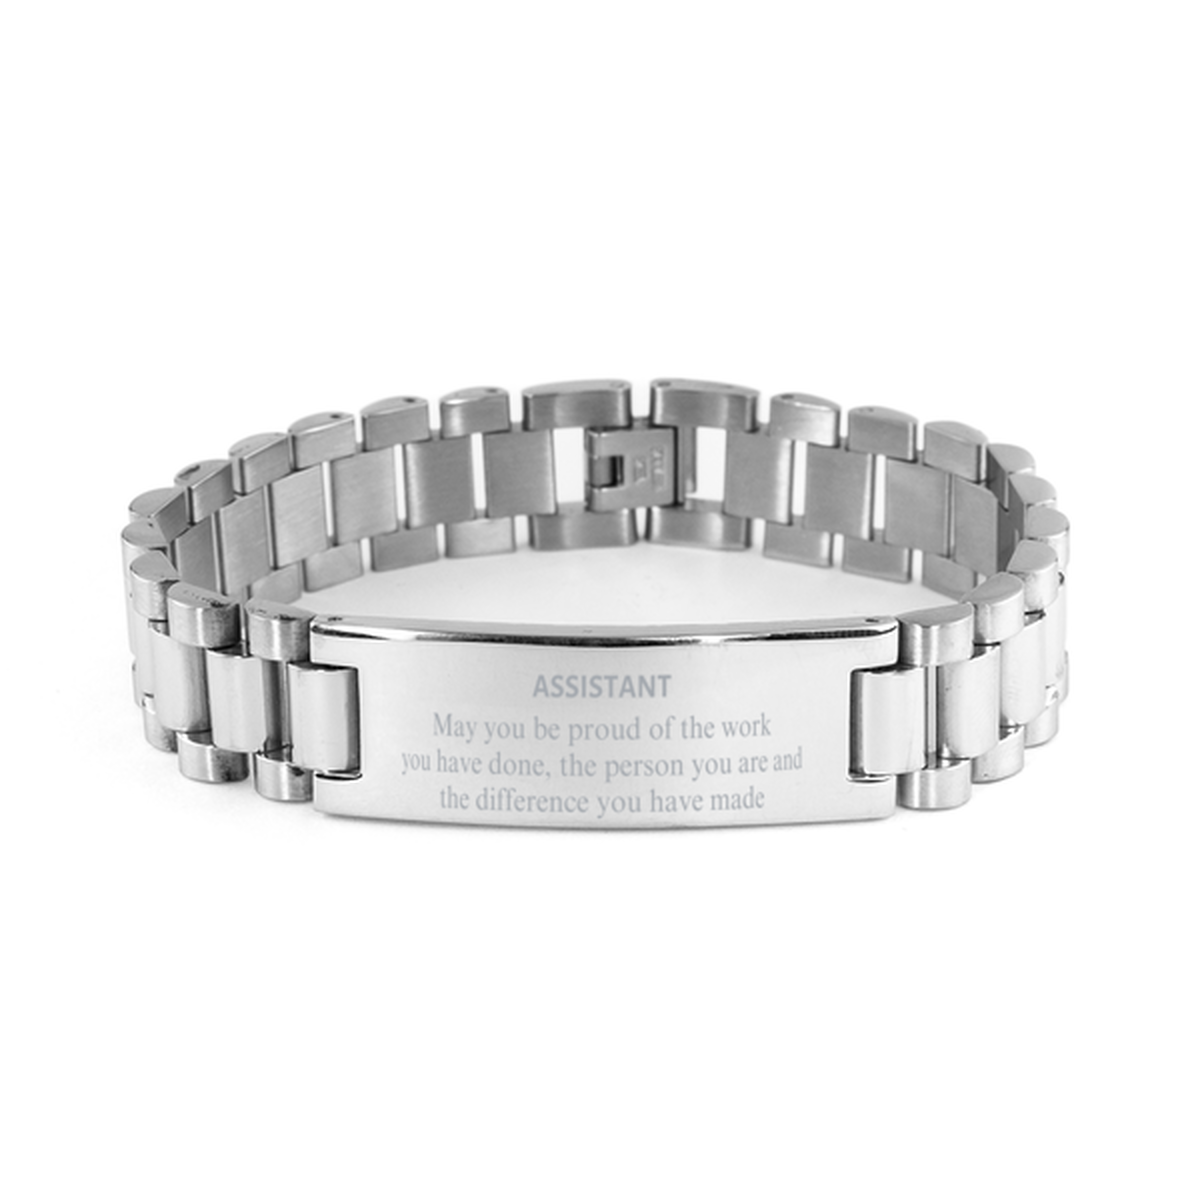 Assistant May you be proud of the work you have done, Retirement Assistant Ladder Stainless Steel Bracelet for Colleague Appreciation Gifts Amazing for Assistant